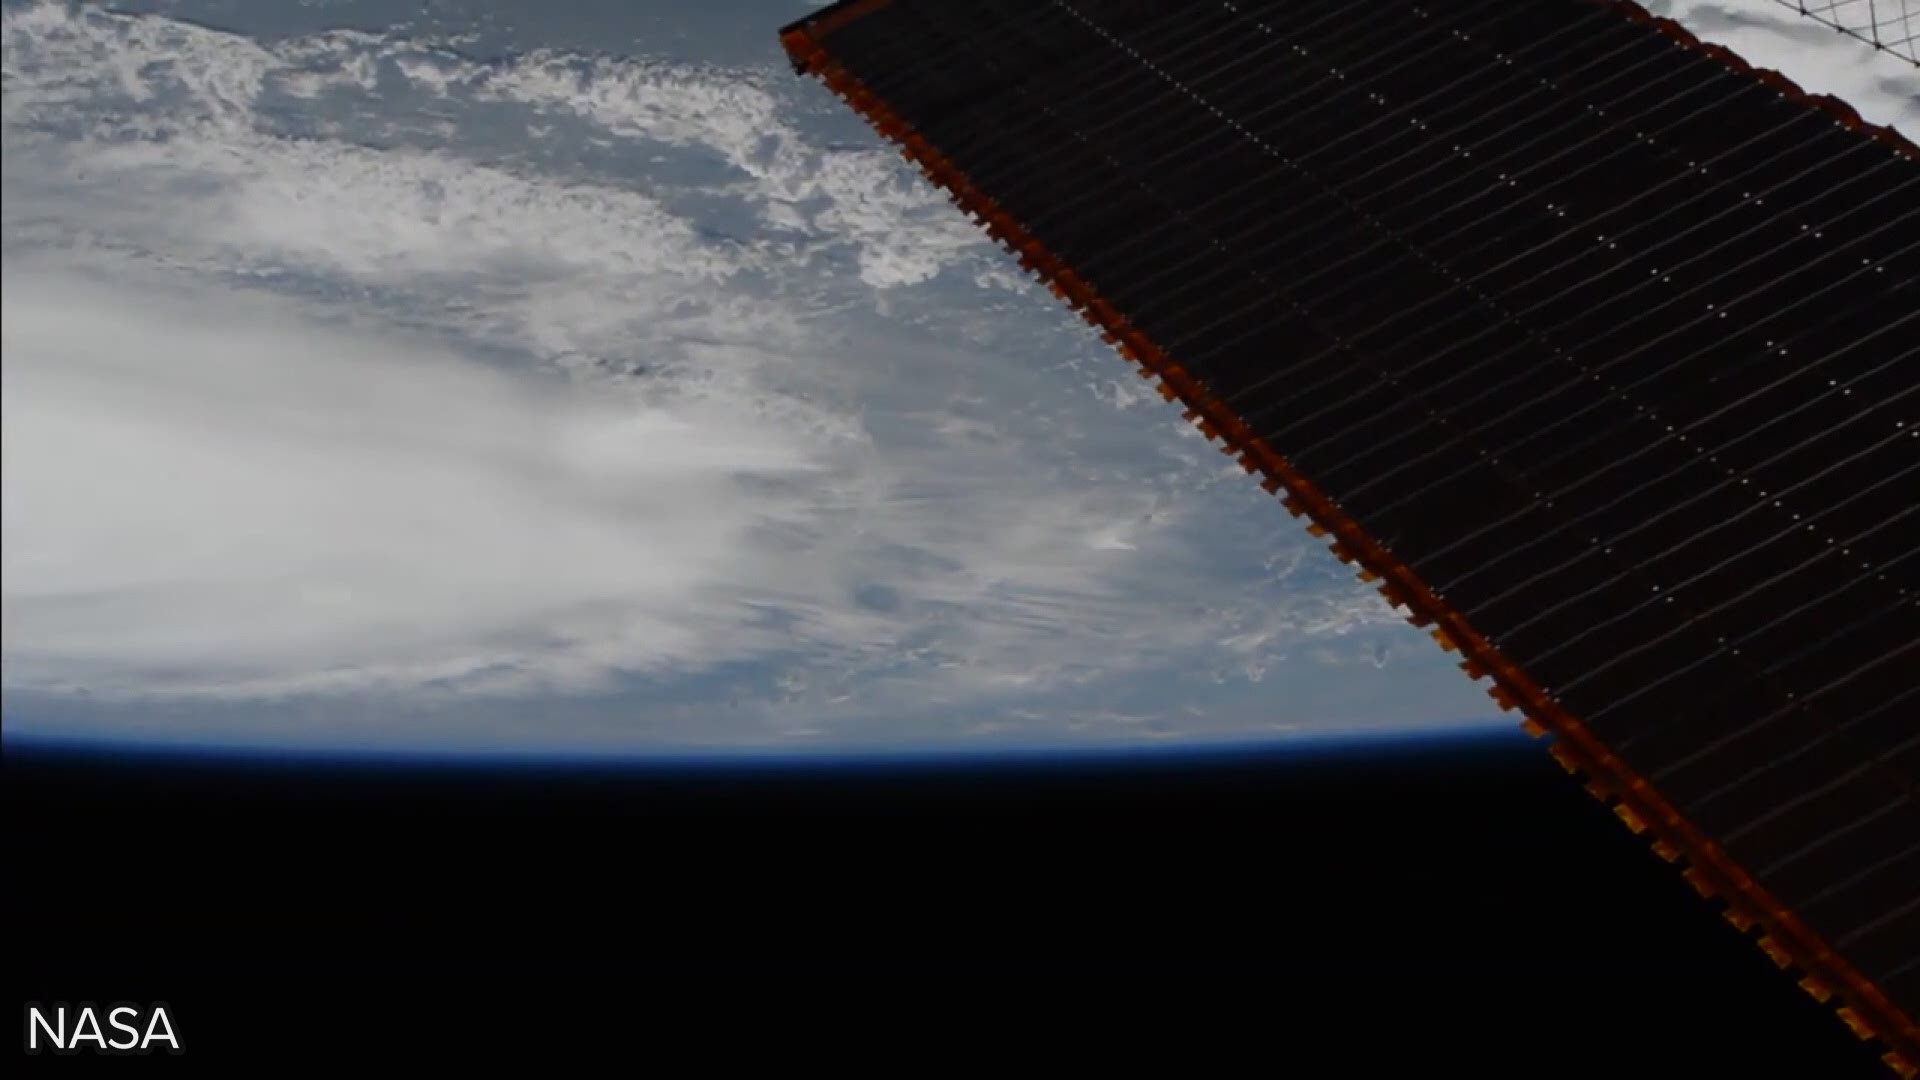 Cameras outside the International Space Station captured this view of Hurricane Dorian as it continued to batter the Bahamas in the Atlantic. As of 12:30 p.m., the storm had 155-mph winds and is a Category 4.